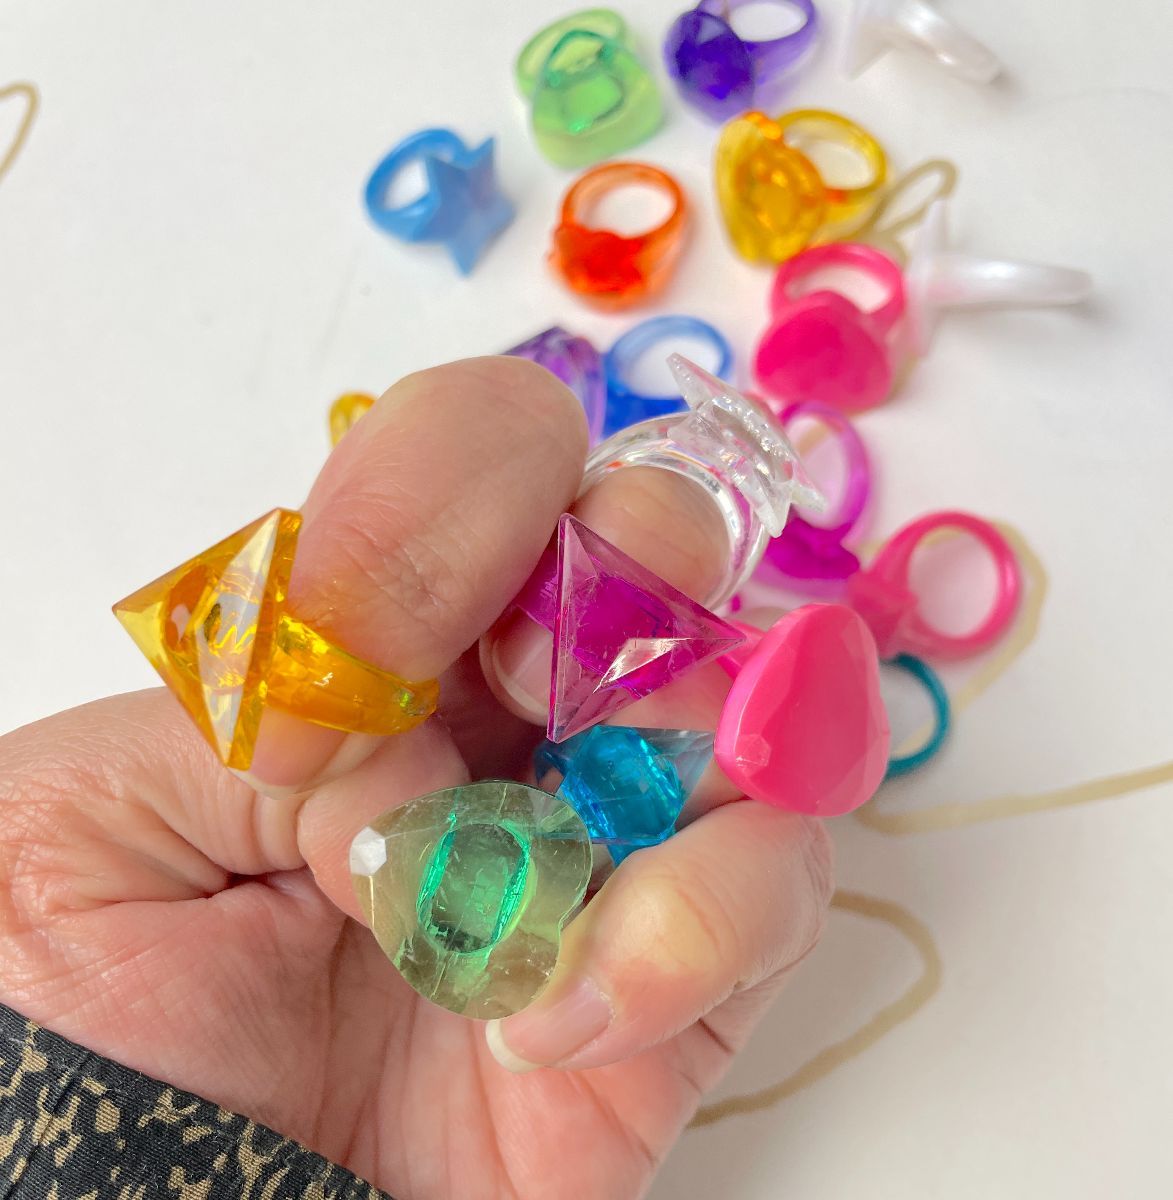 Fun Bright! Geometric Colorful Candy Clear Plastic Rings